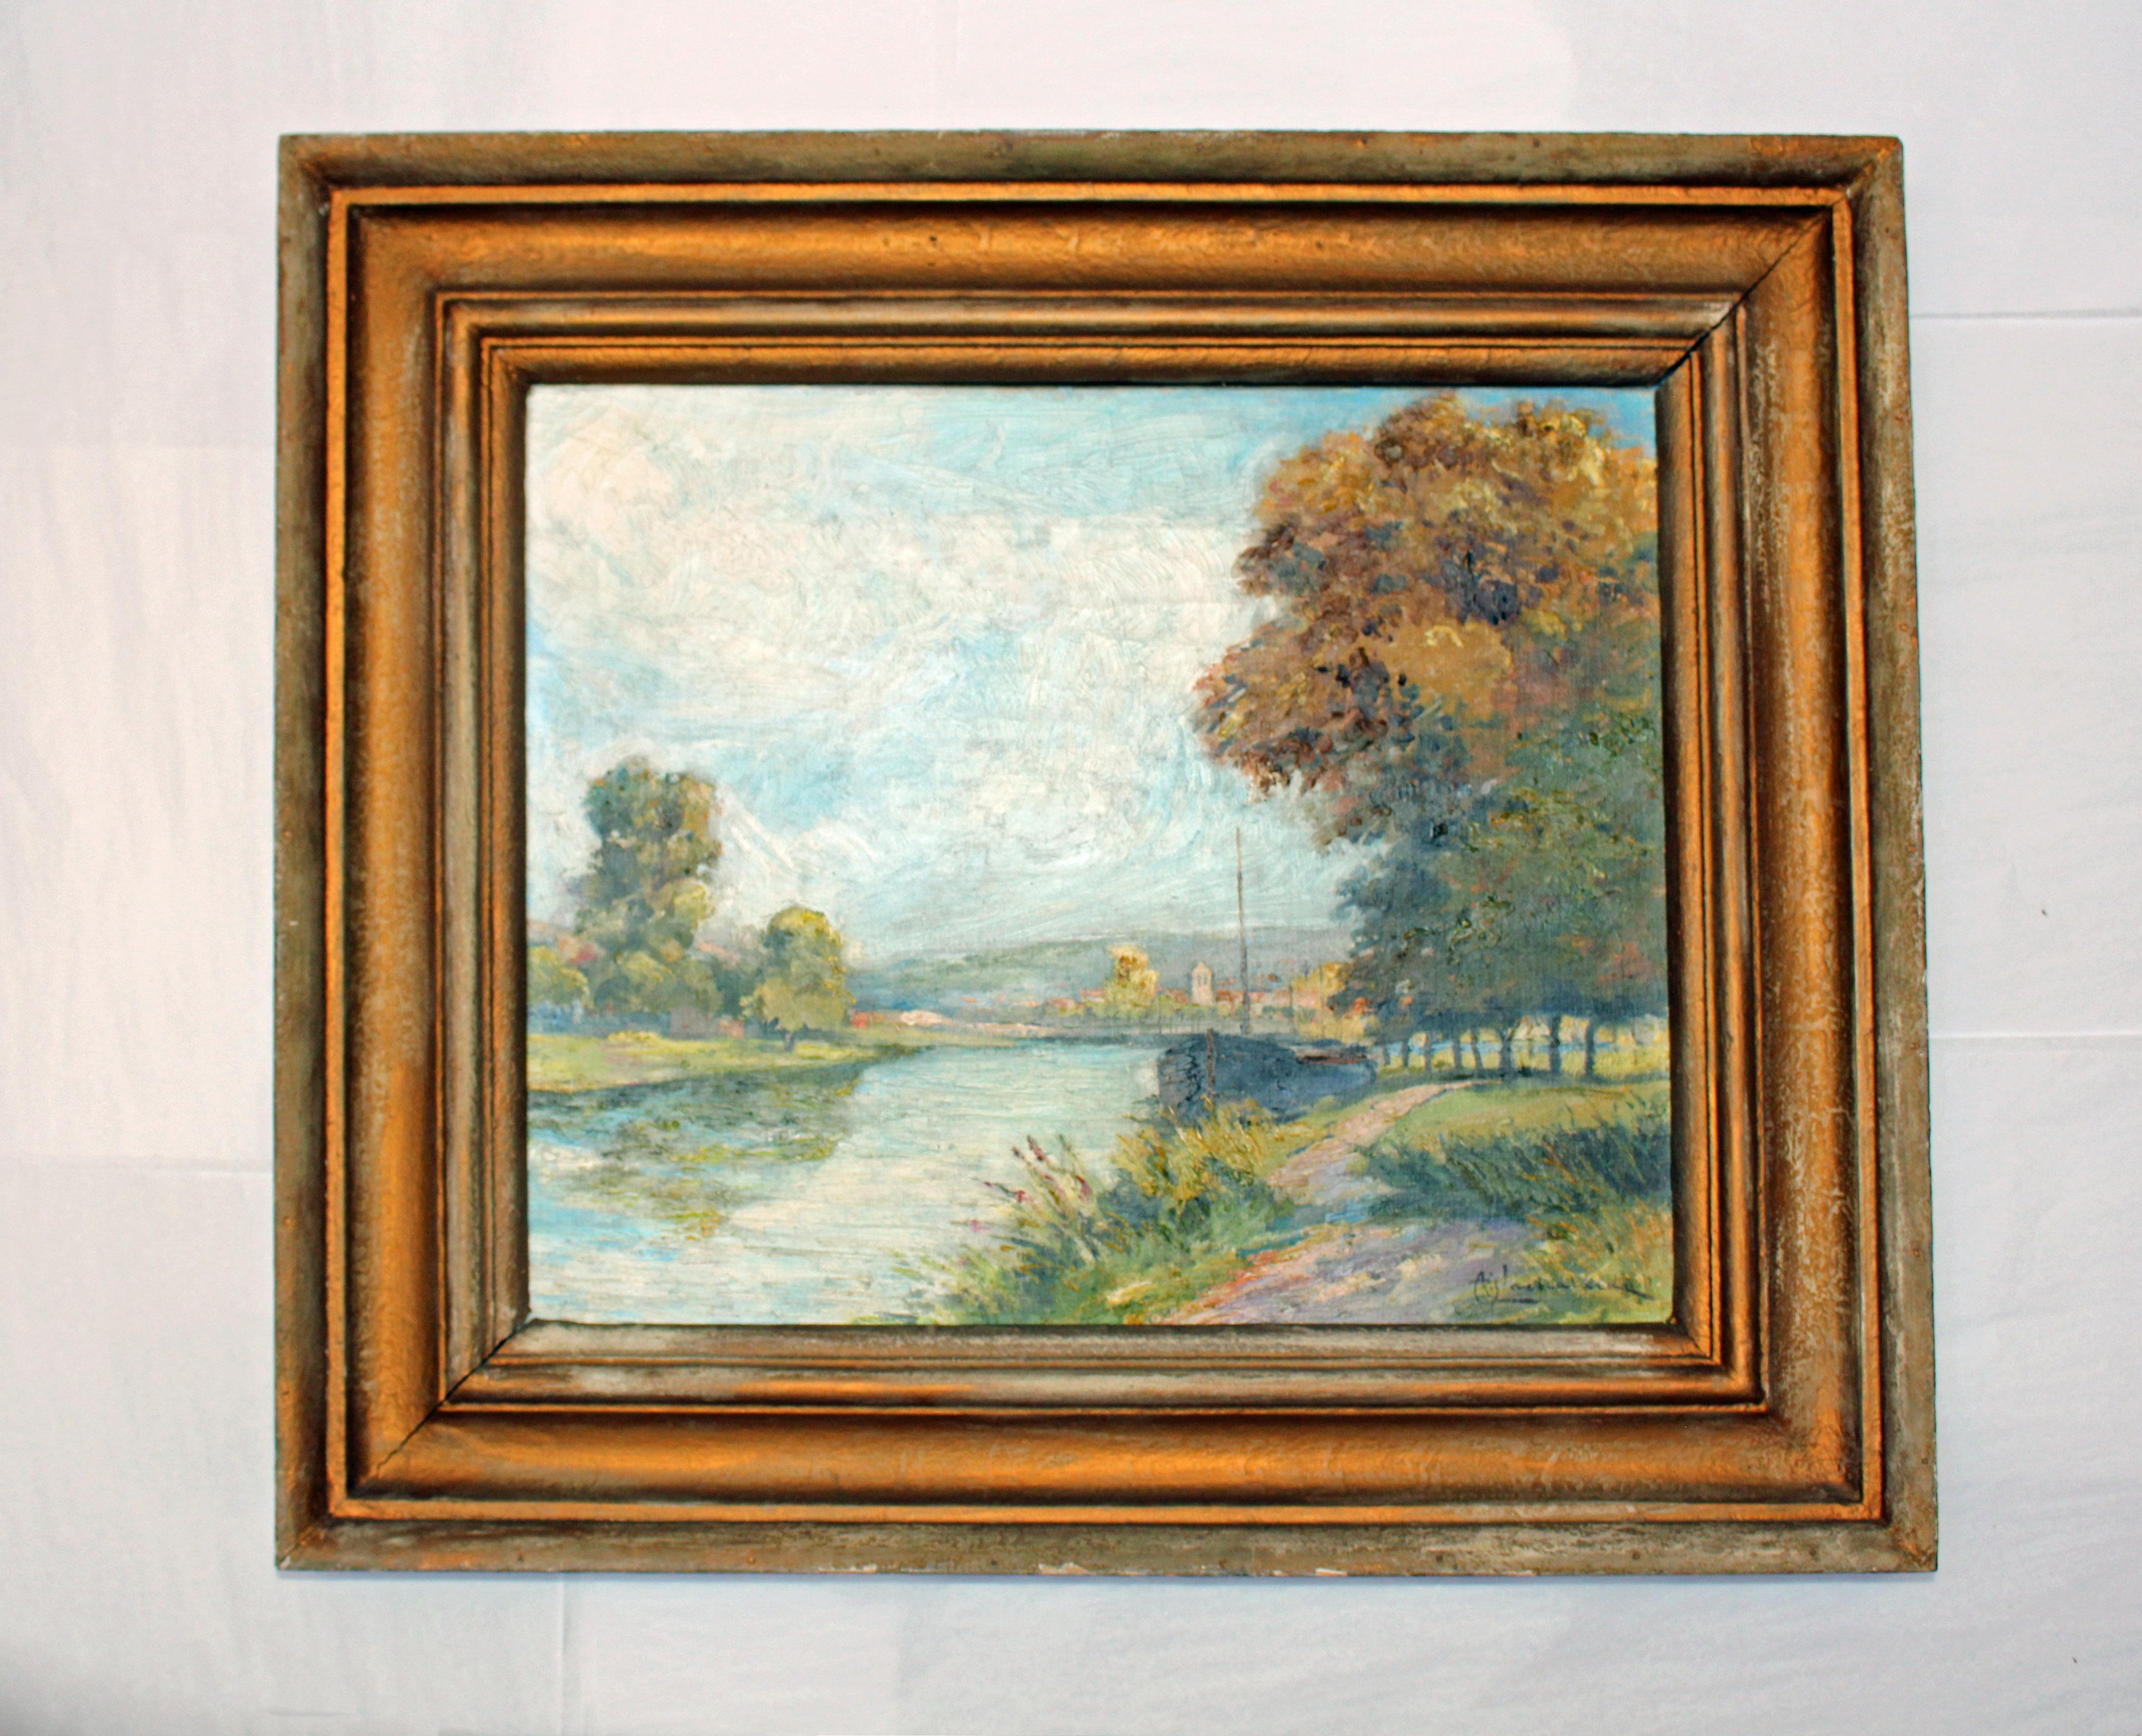 Early 20th century oil on canvas painting 